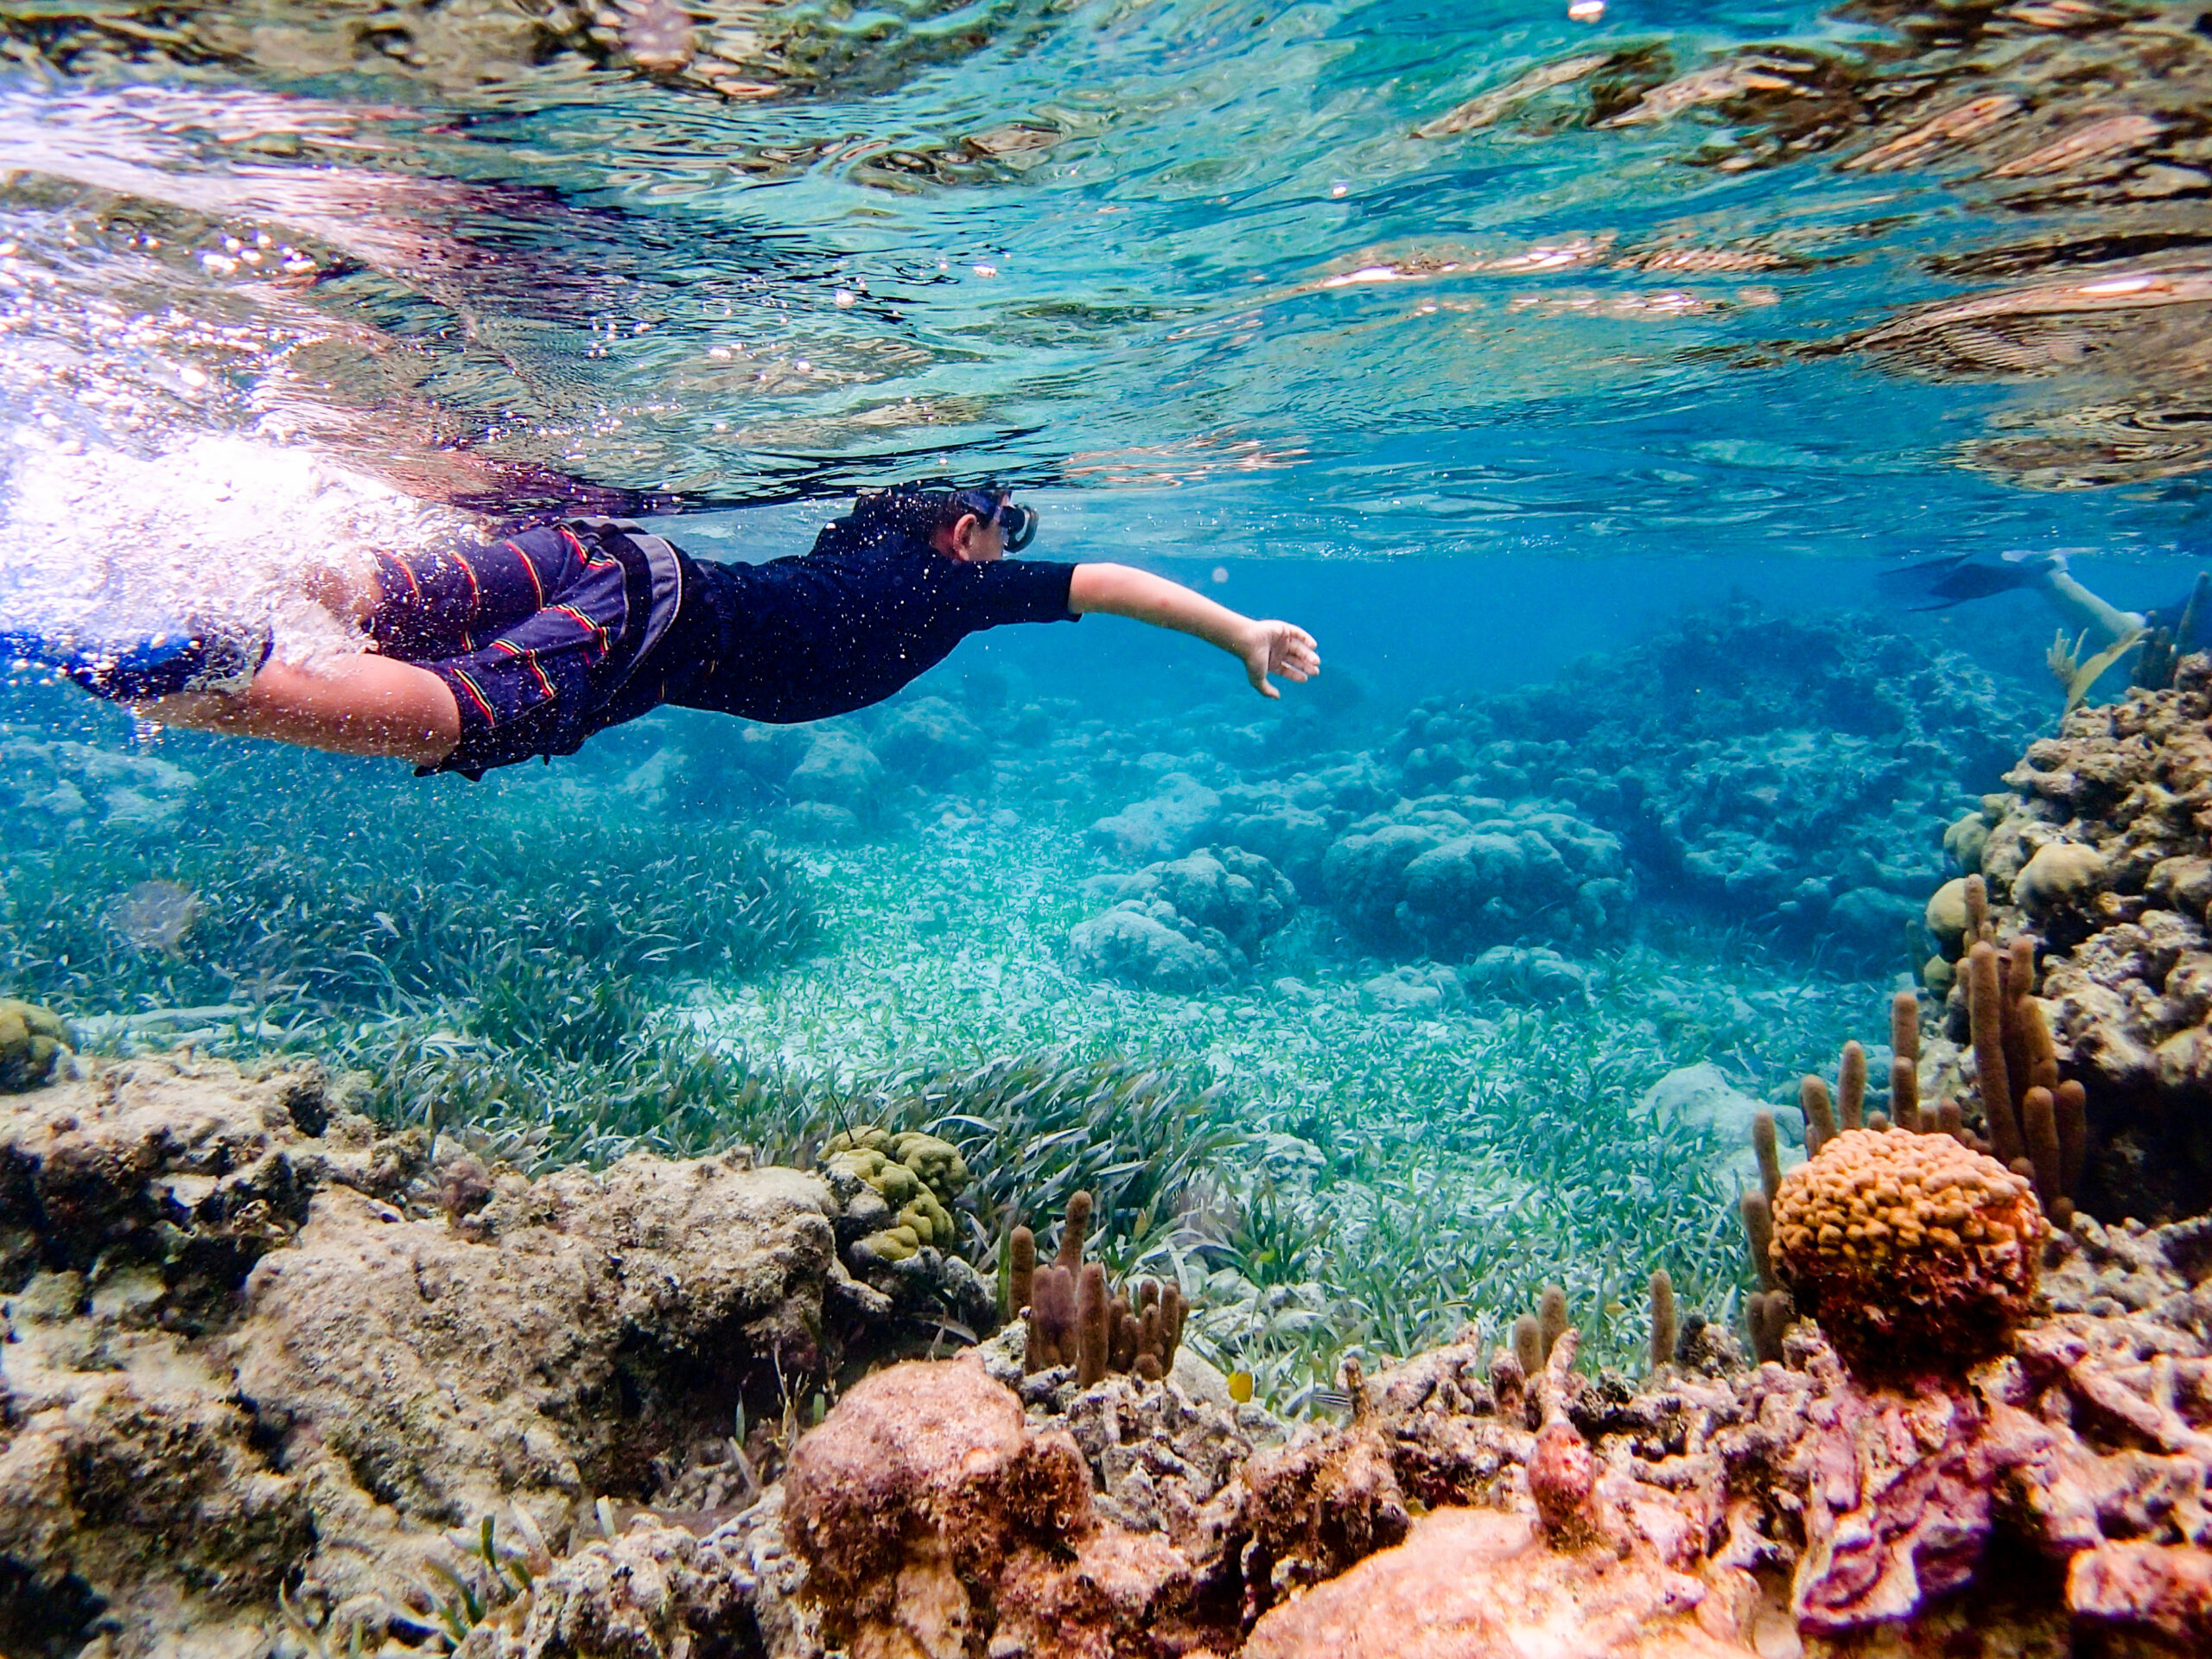 Underwater image of 7 year old boy snorkeling through coral reef near Ambergris Caye, Belize